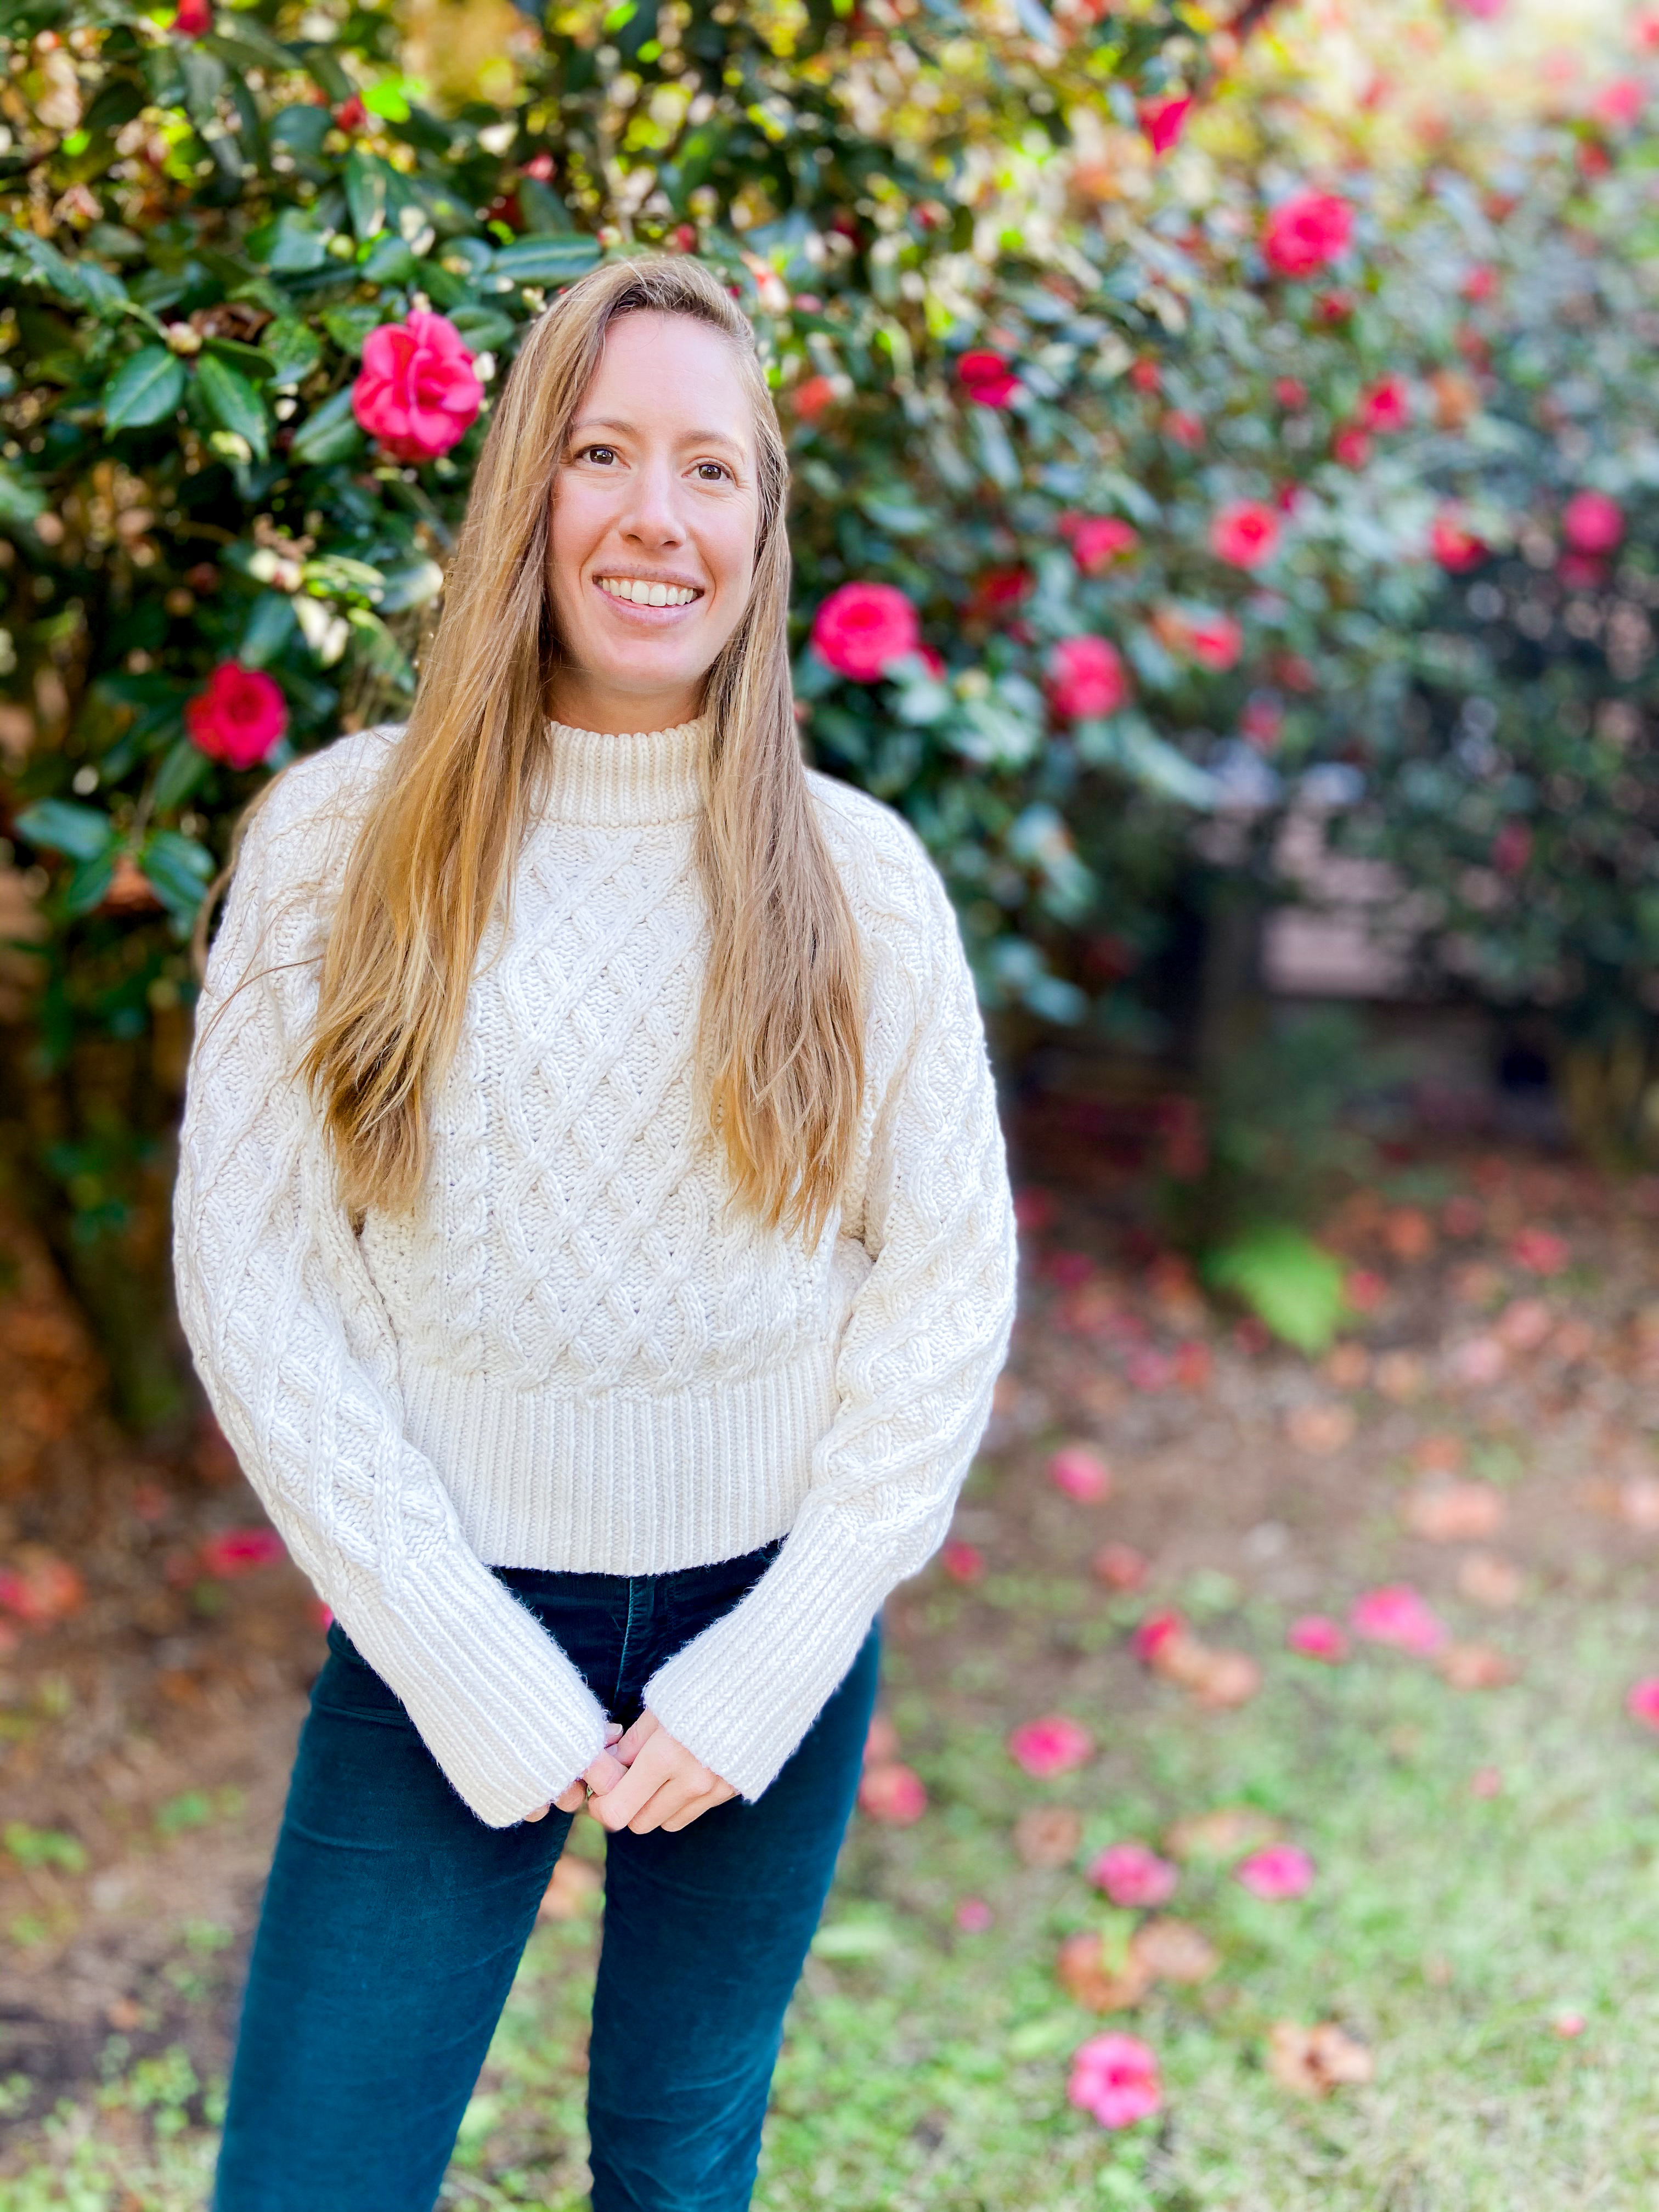 Tallahassee Travel Guide / Winter Outfit Idea / Sustainable Fashion / Sustainable Style / What to Wear in the Winter / What to Wear with Ankle Boots / How to Wear Skinny Jeans / Affordable Sweaters / Cable Knit Sweater / Top Knot Headband